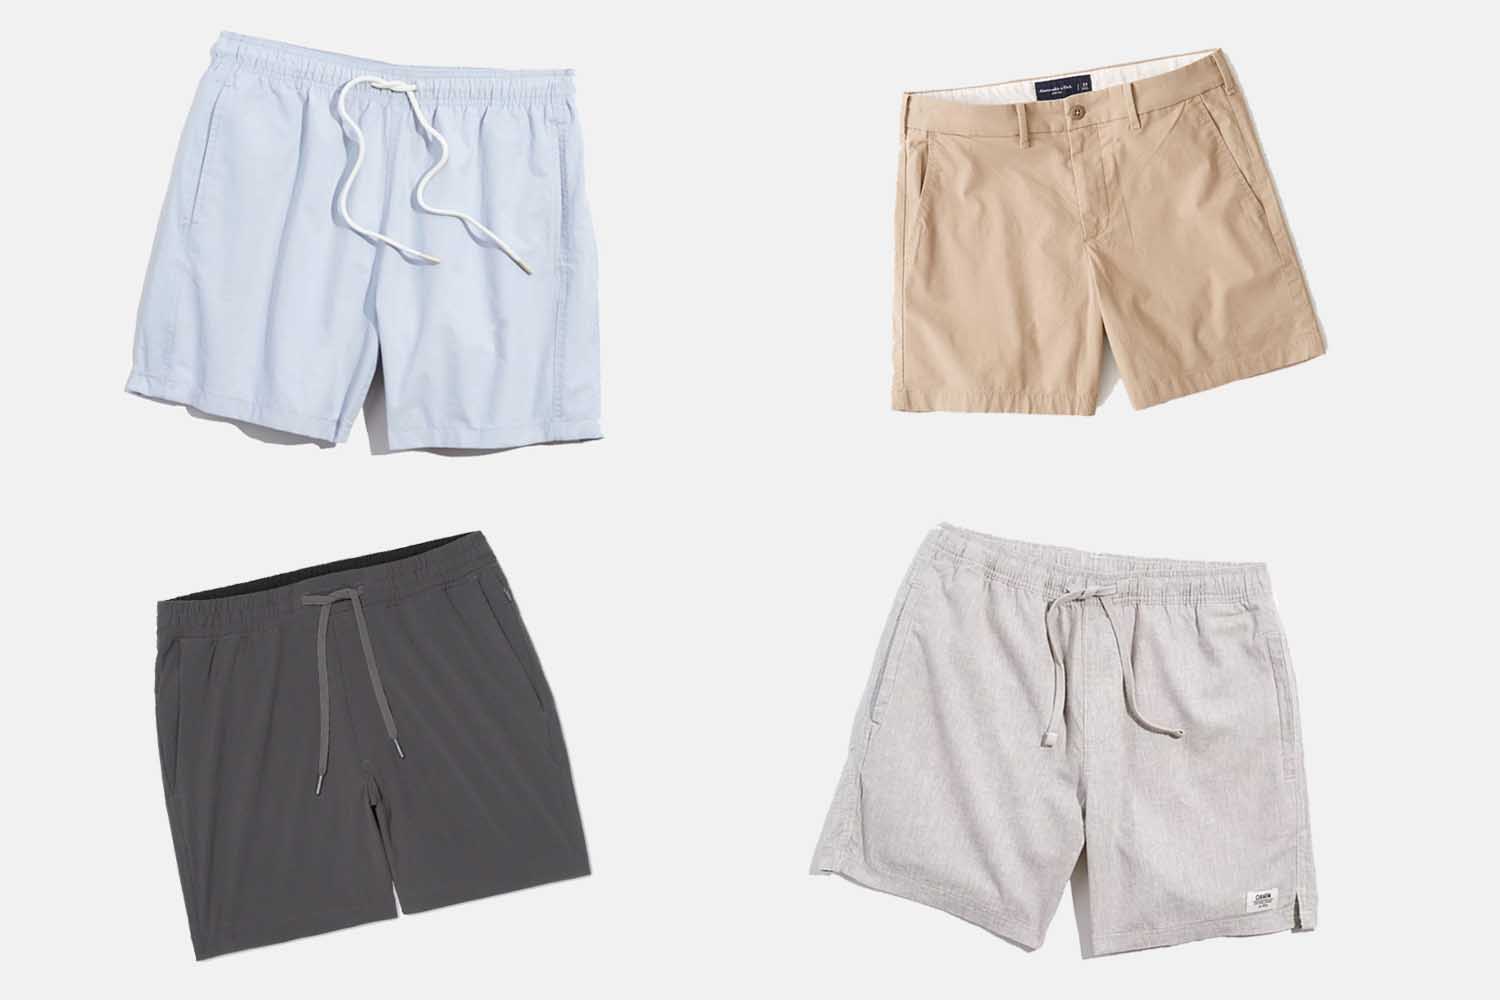 10 Pairs of Shorts, None of Them Over 5 Inches in Length - InsideHook